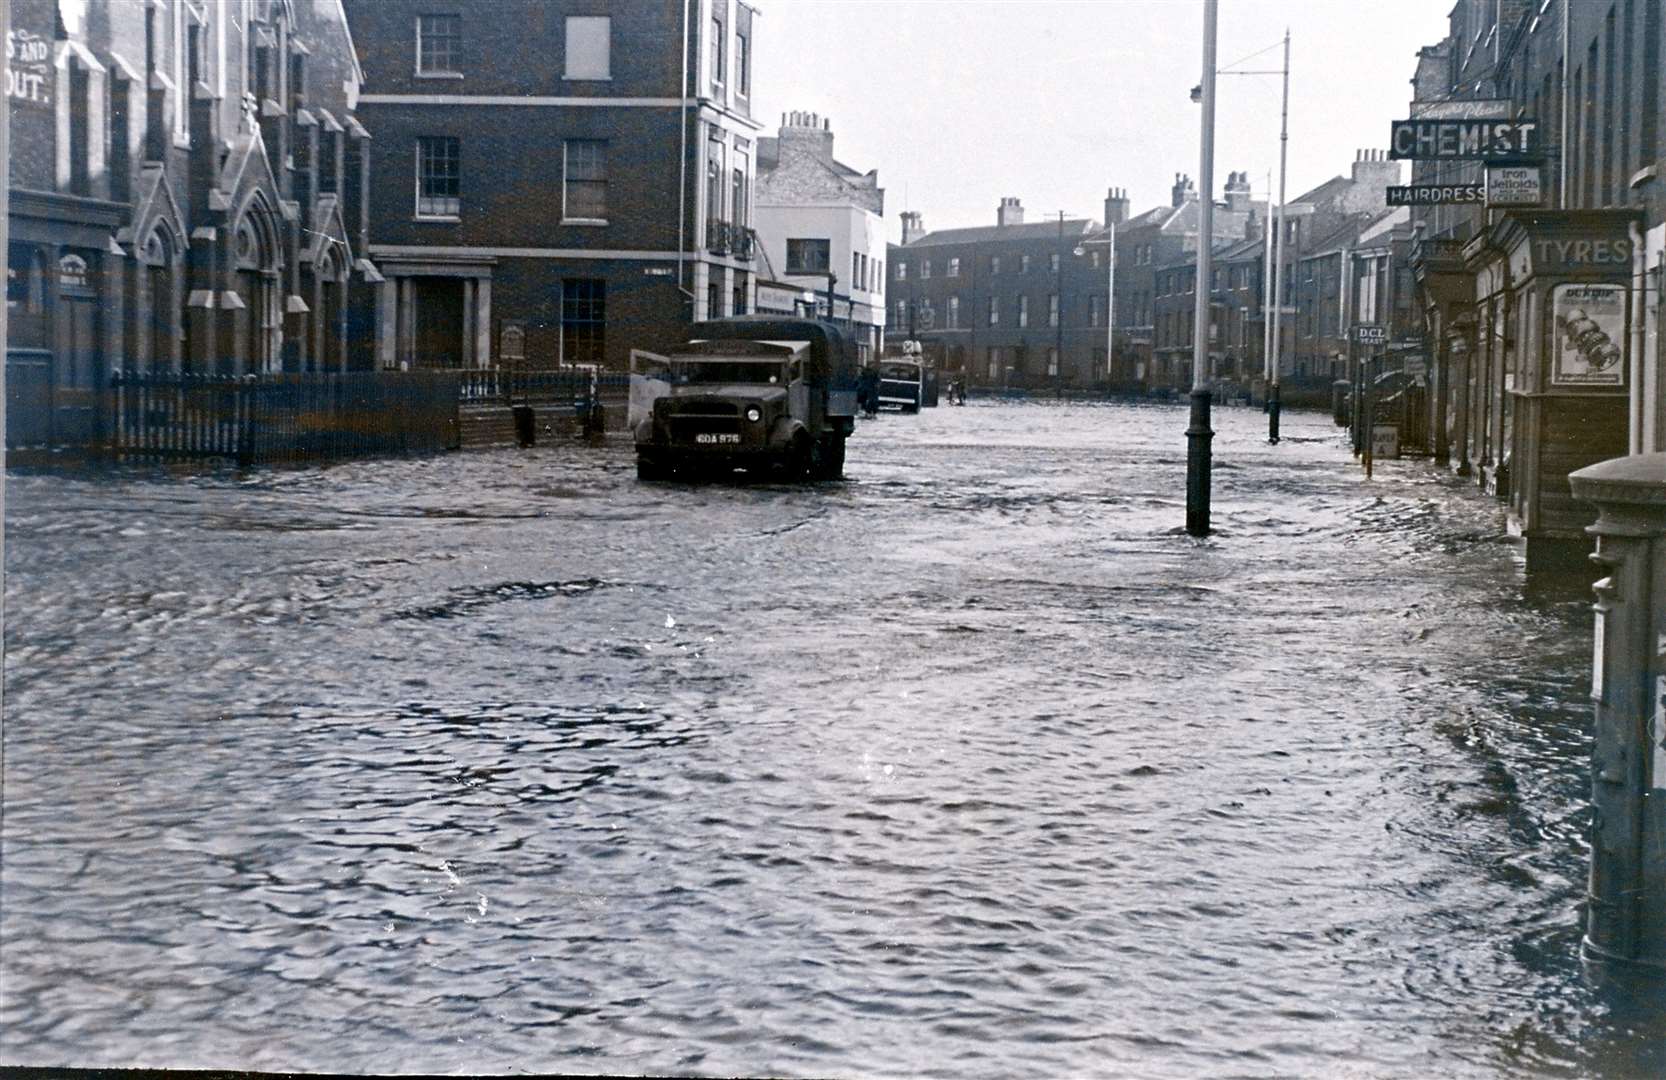 London Road flooded during the 1953 floods, photo taken by Lenoard Edwards